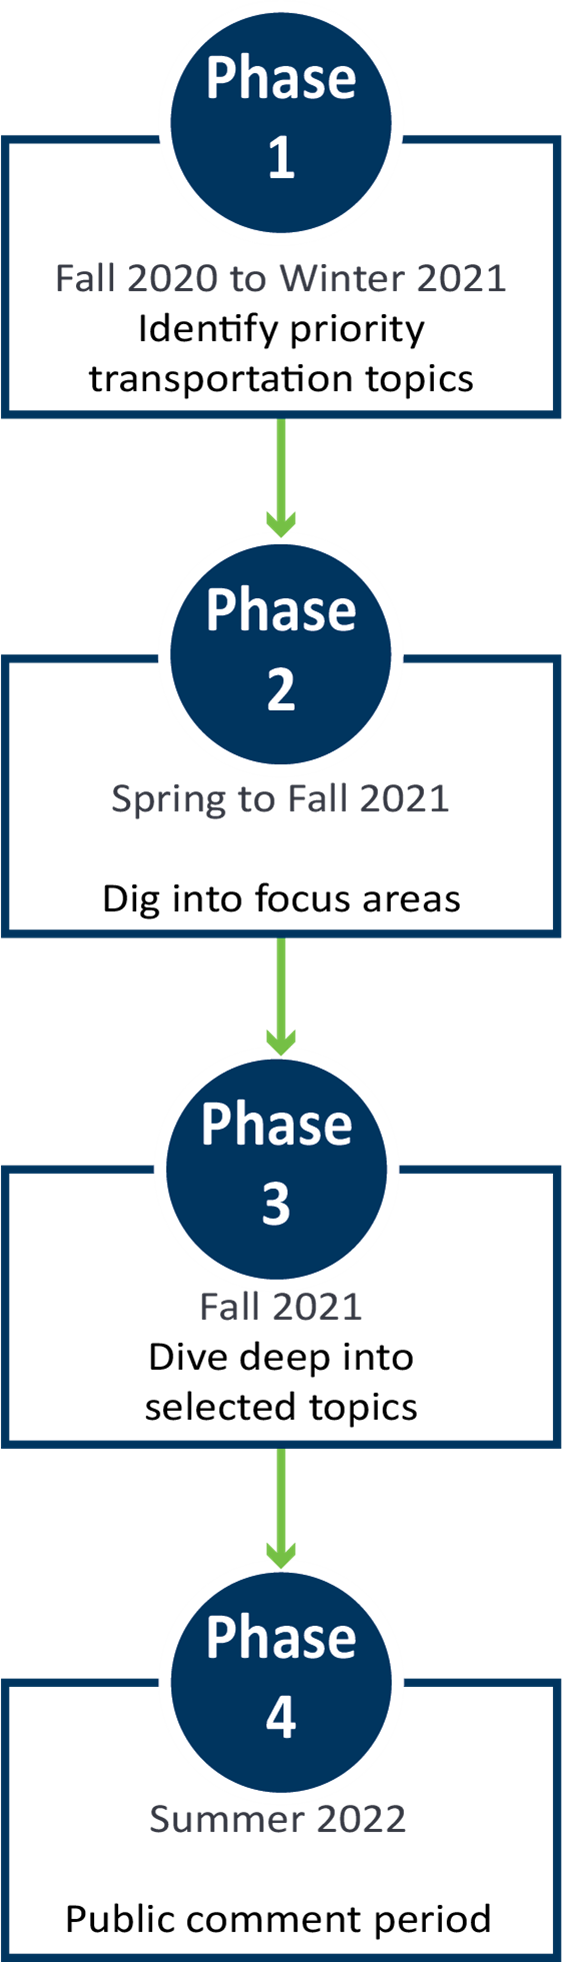 Four phases of Statewide Multimodal Transportation Plan engagement. Phase 1 occurred in fall of 2020 through winter of 2021 and identified priority transportation topics. Phase 2 occurred from spring to fall of 2021 and dug into focus areas. Phase 3 was in the fall of 2021 and dove deep into selected topics. Phase 4 occurred in summer 2022 gathering public comments on the draft SMTP.